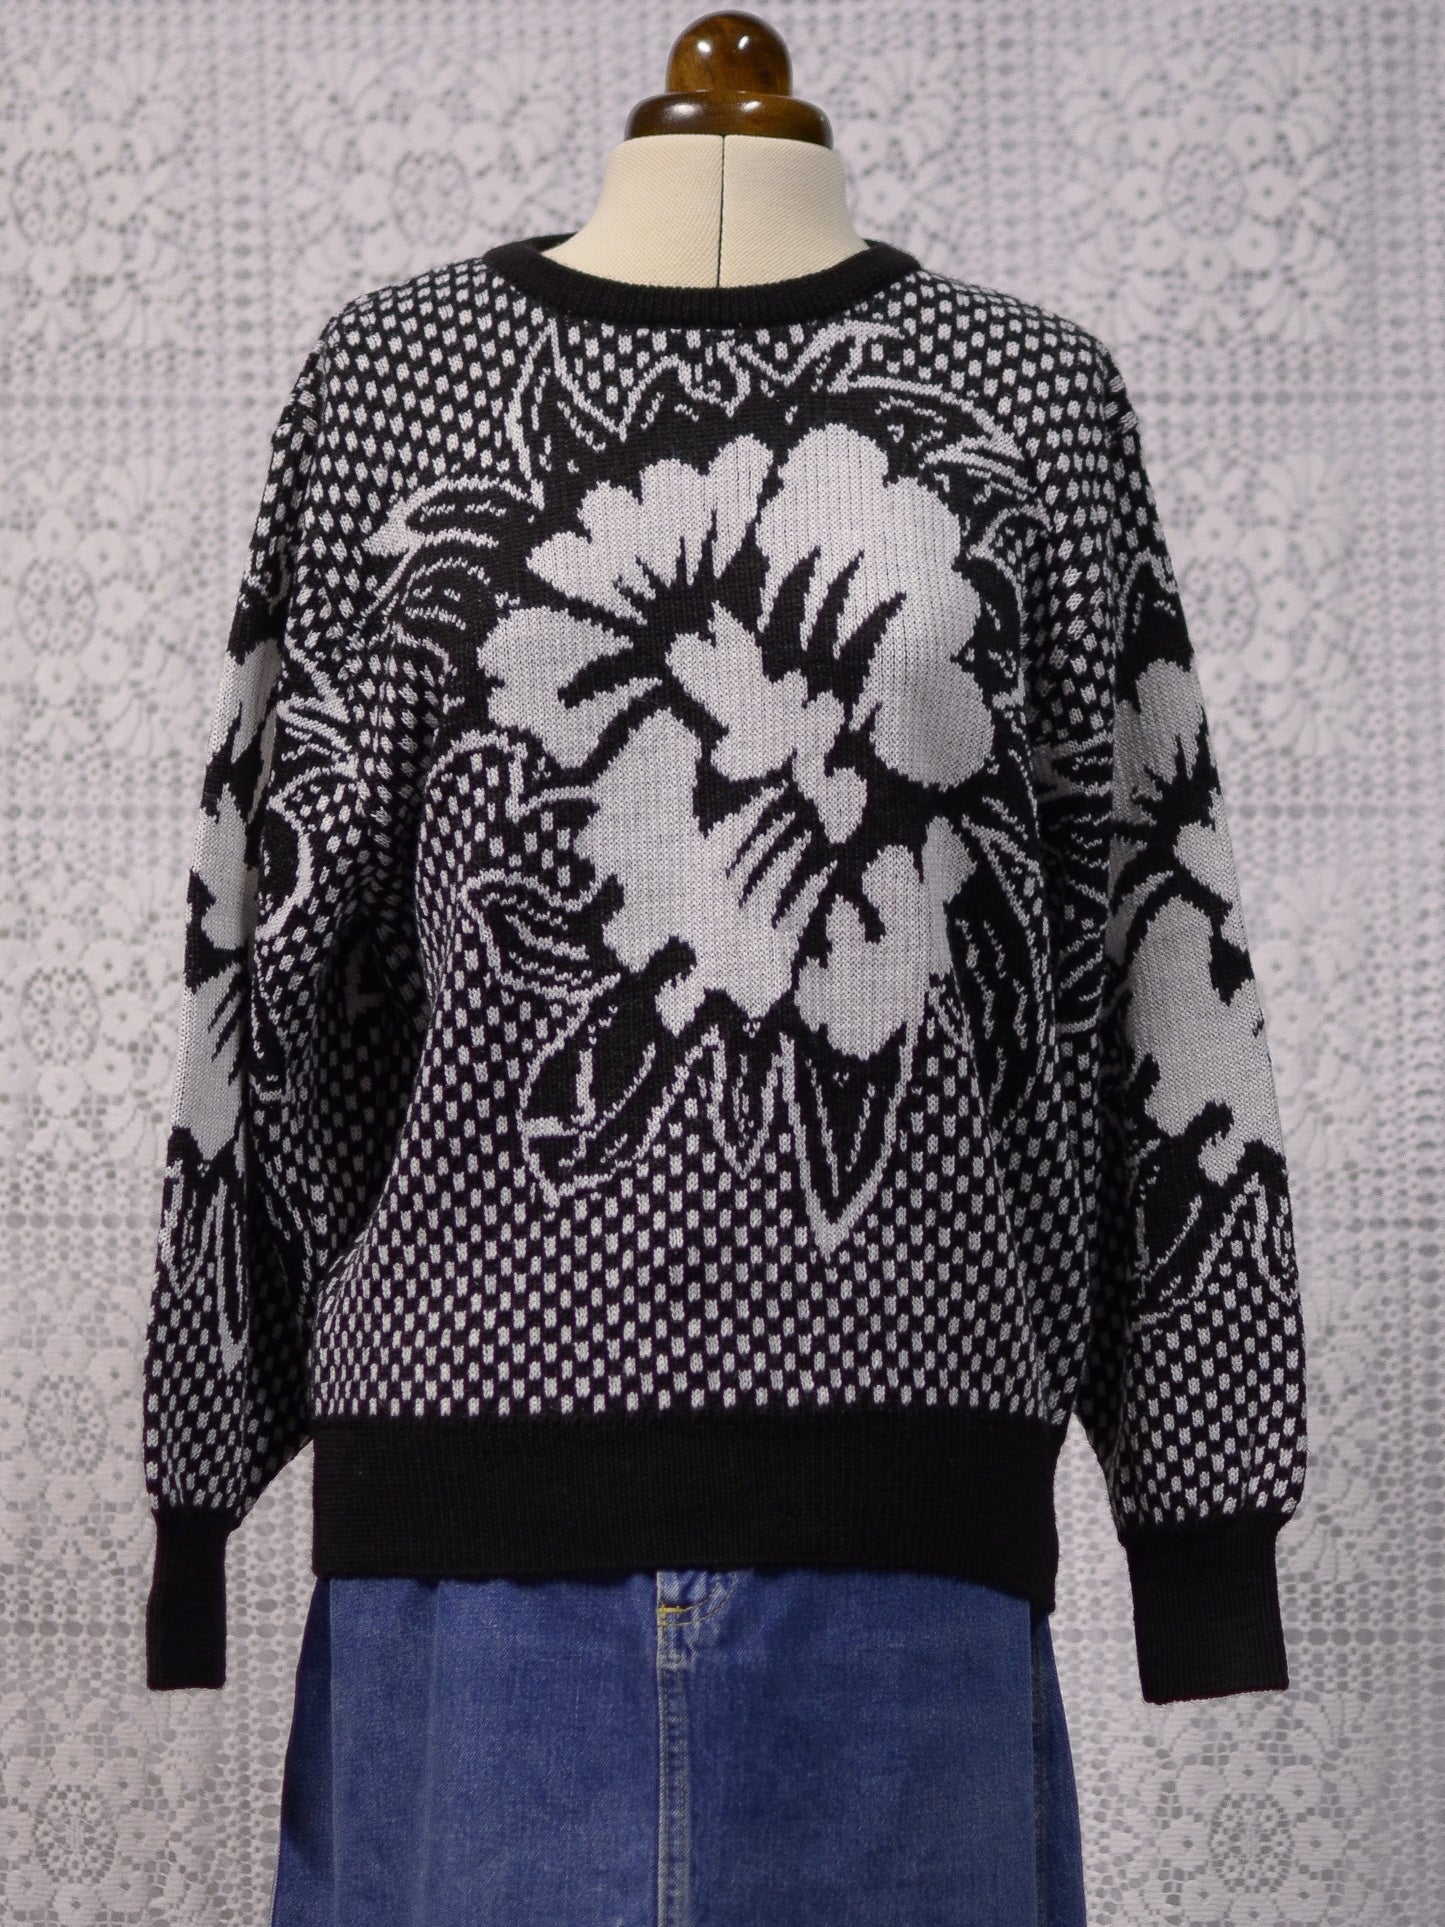 1990s black and white flower motif graphic jumper